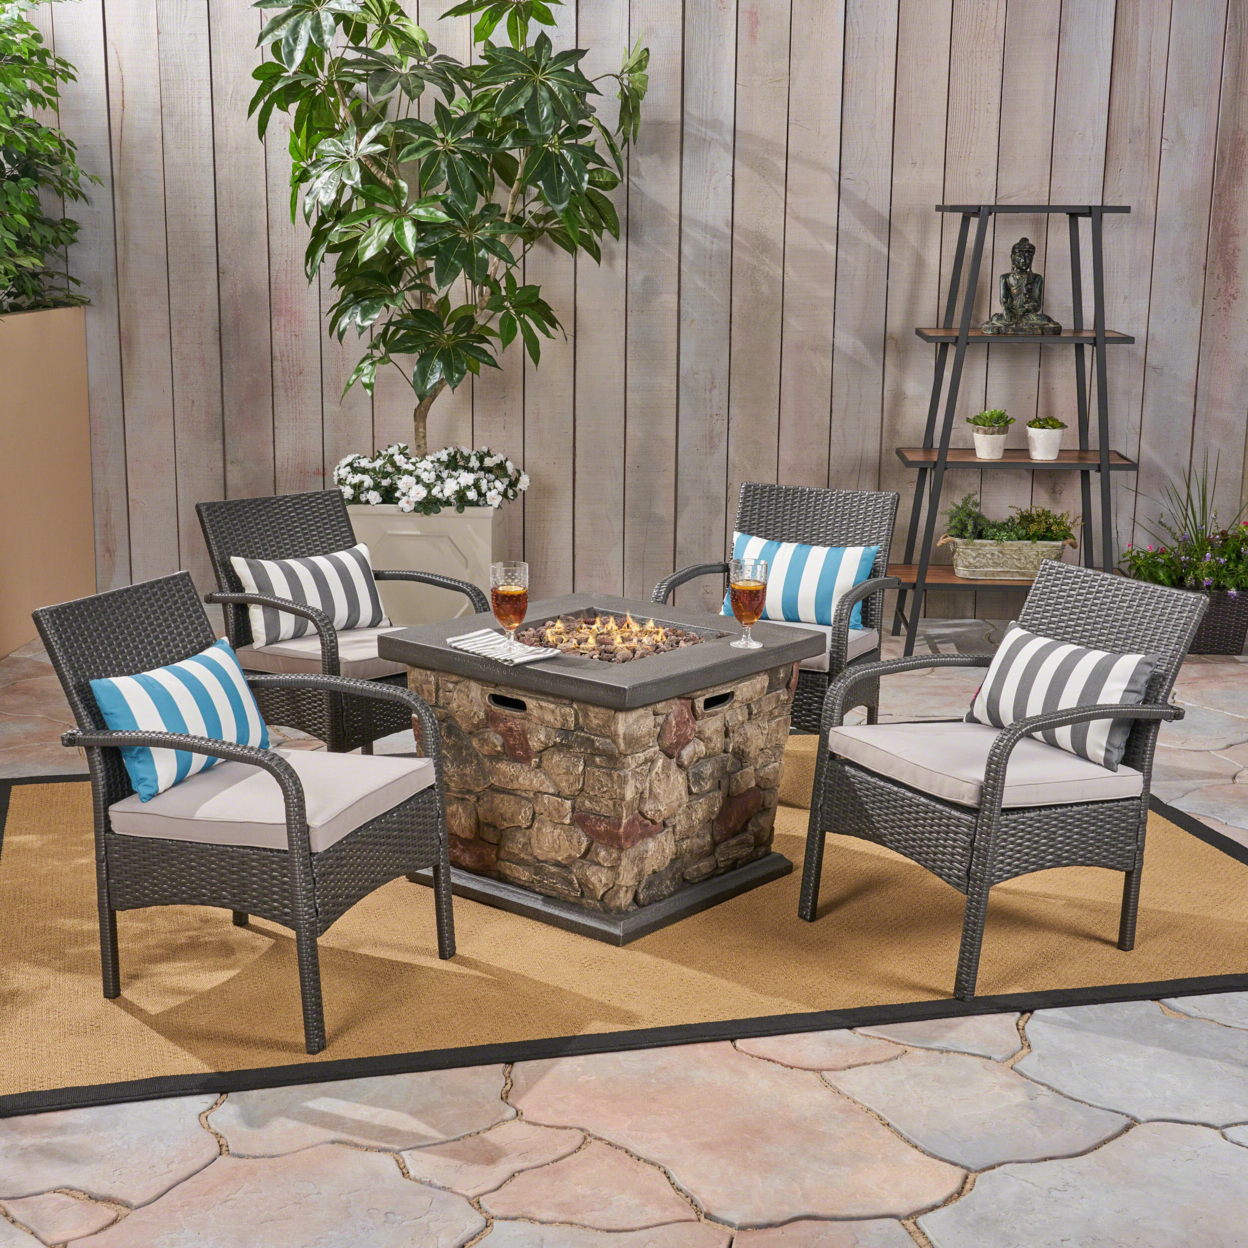 Mavis Patio Fire Pit Set, 4-Seater With Club Chairs, Wicker With Outdoor Cushions - Gray / Silver / Stone